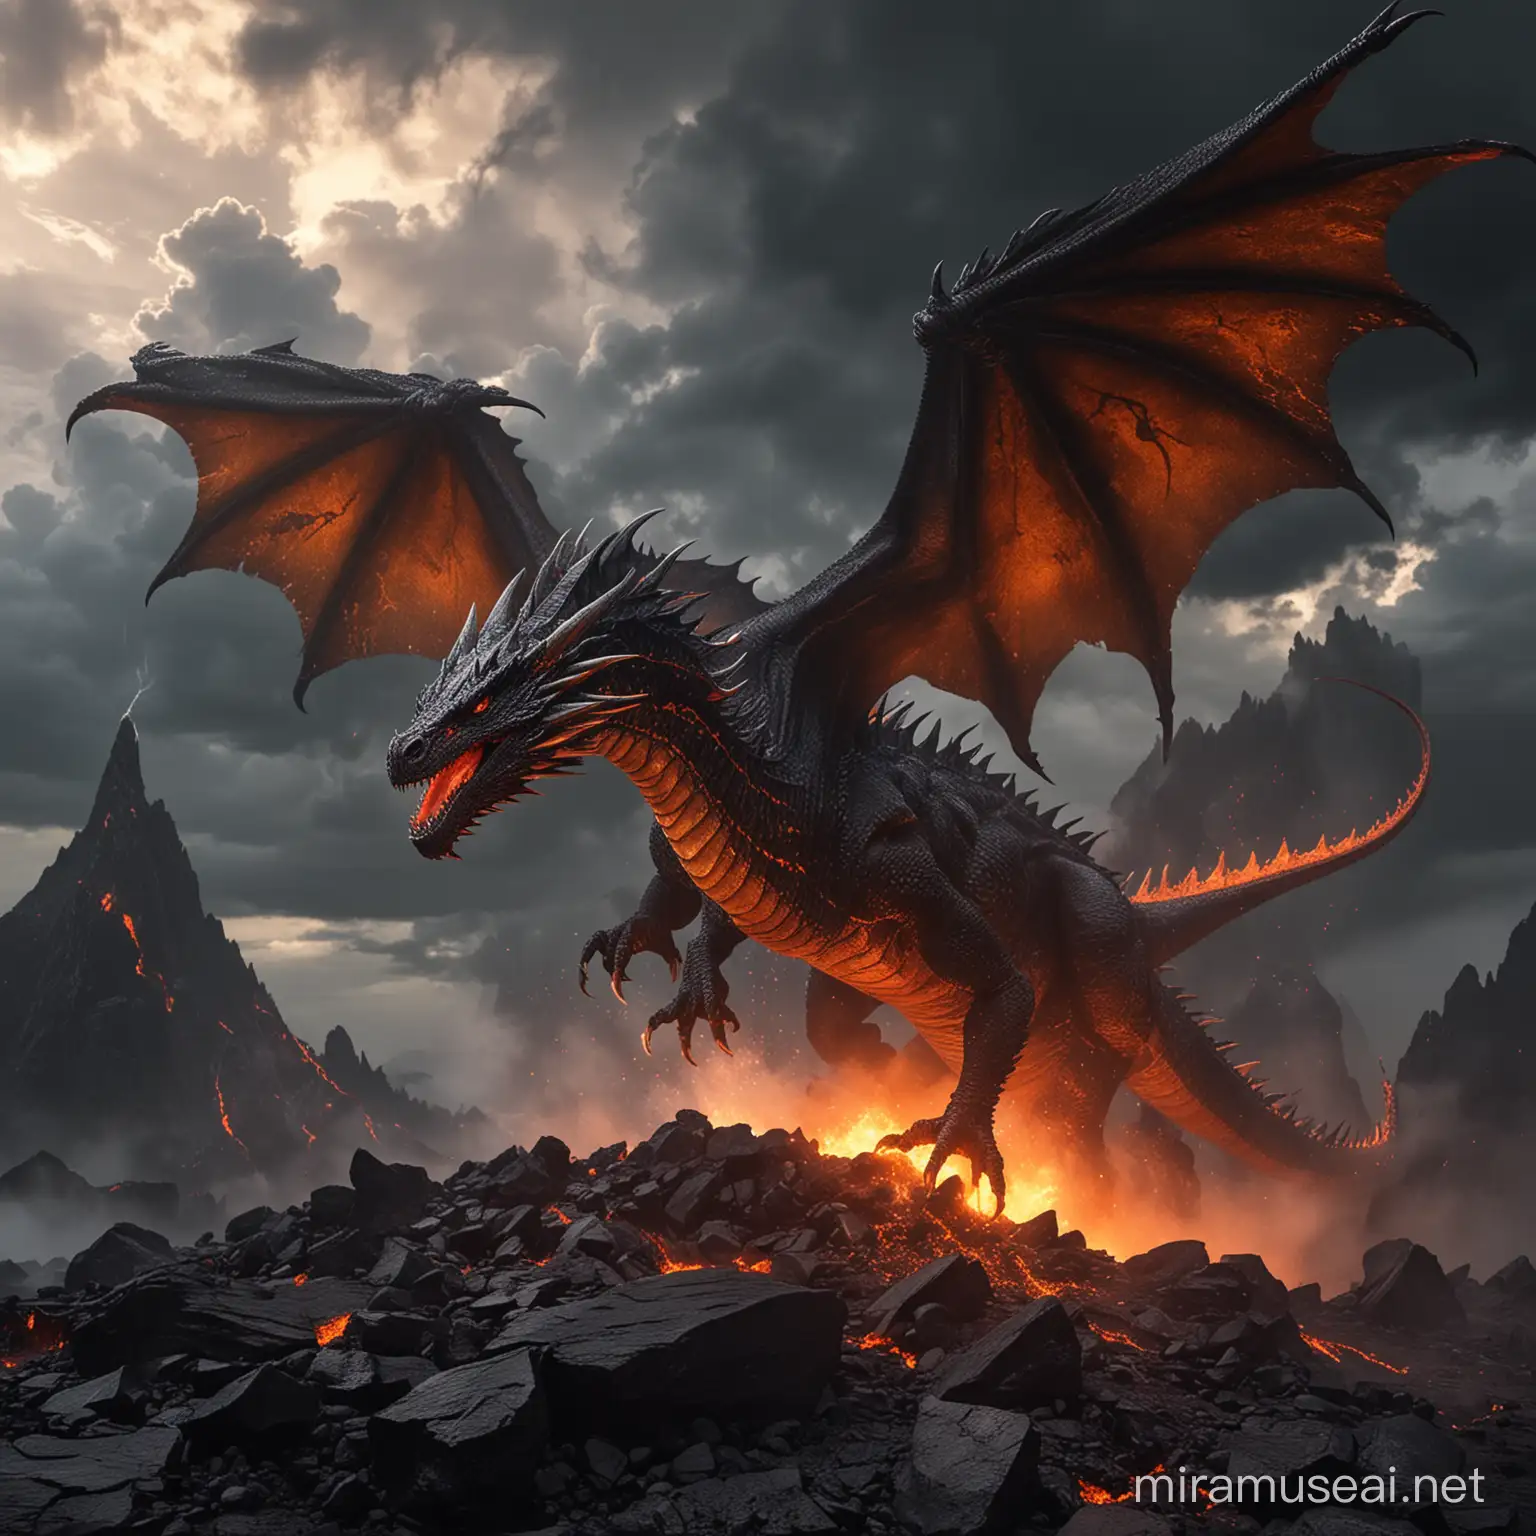 Volcanic winged dragon with black scales, glowing orange cracks and throat. Massive and fearsome. Foggy. Dramatic clouds and lighting.